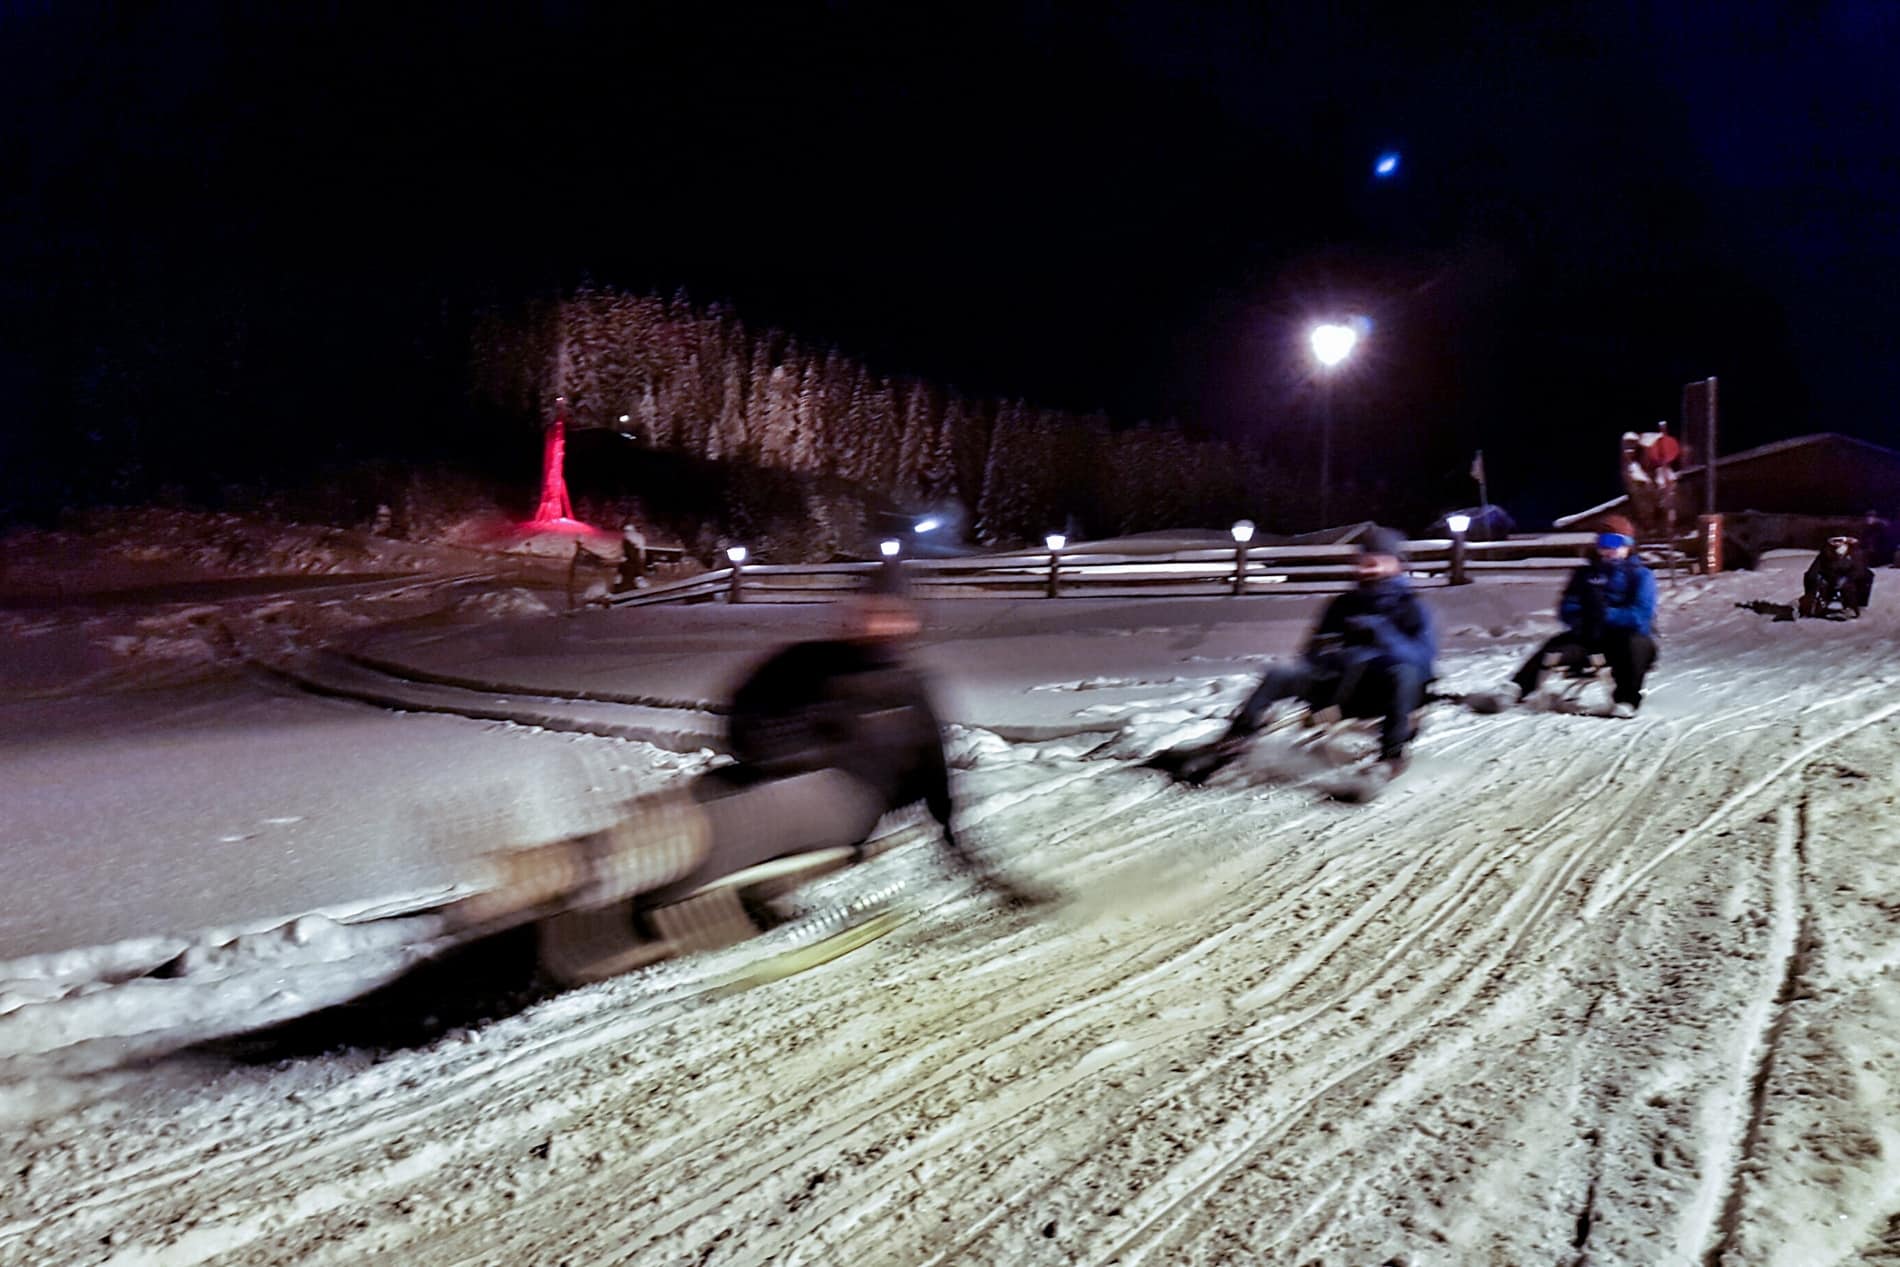 Four people glide fast on the snow on a toboggan at nighttime. 